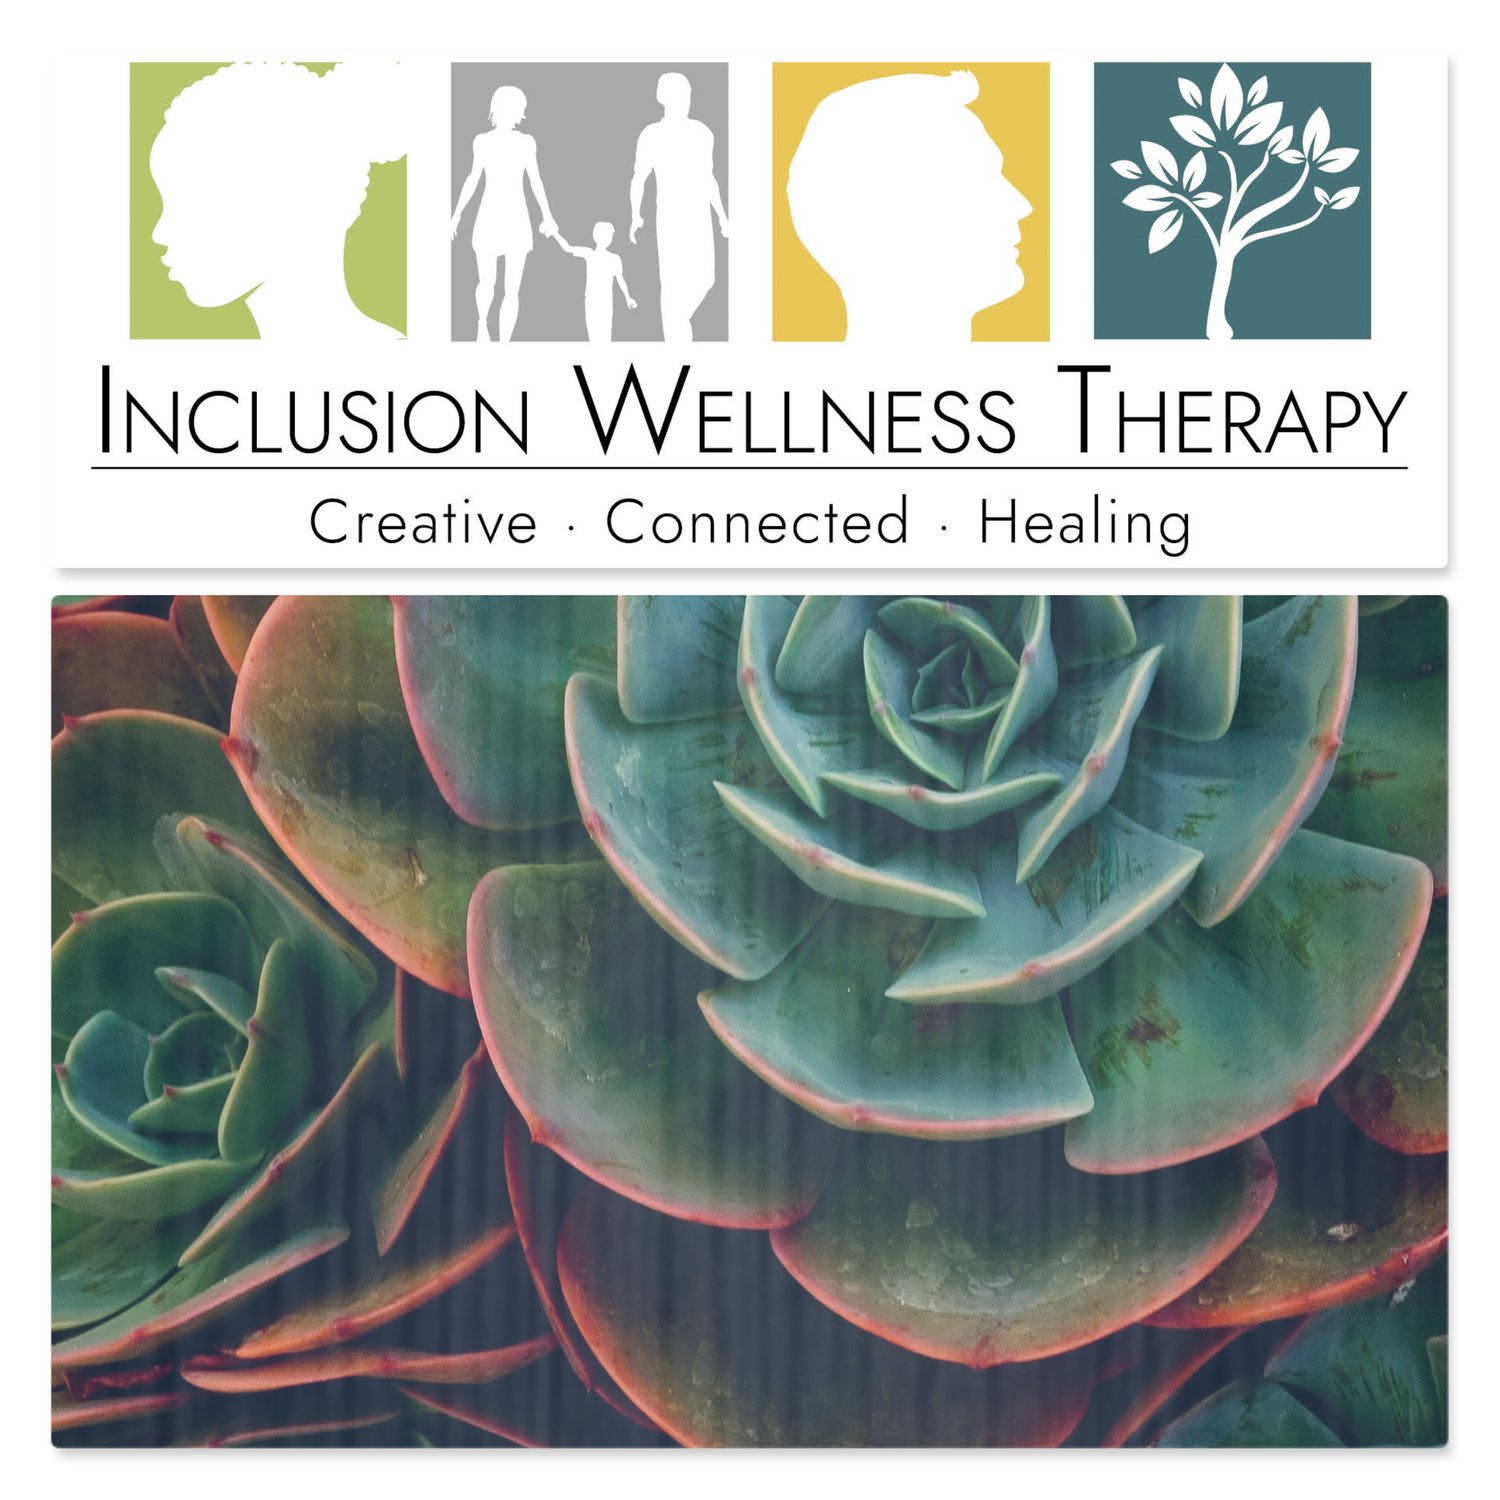 Inclusion Wellness Therapy